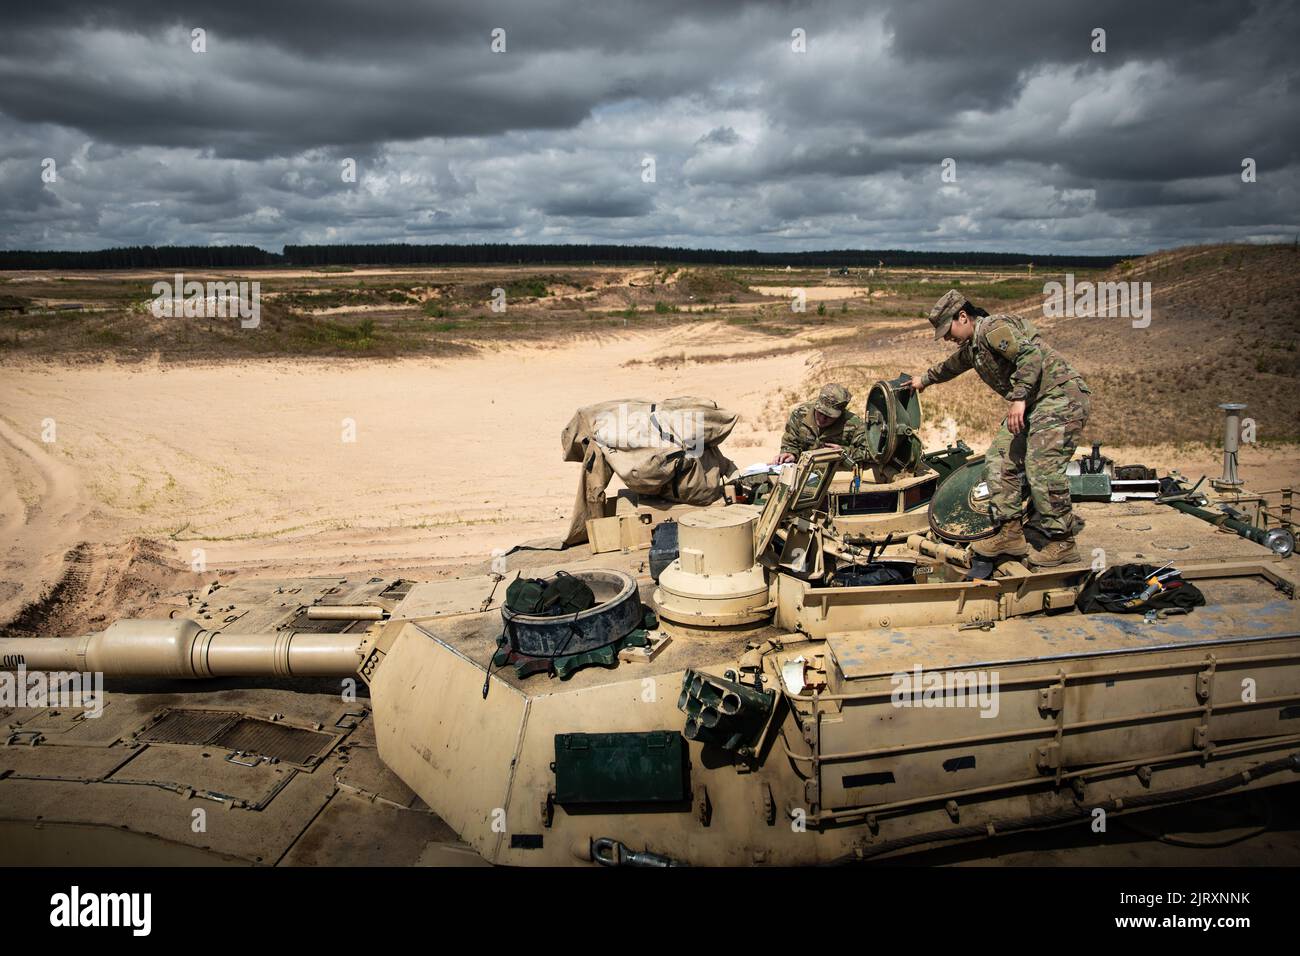 U.S. Army 2nd Lt. Emily Alvarado, a tank commander assigned to the 1st Battalion, 66th Armor Regiment, 3rd Armored Brigade Combat Team, 4th Infantry Division, conducts an equipment inspection on an M1A2 Abrams tank at Pabrade, Lithuania, July 19, 2022. (U.S. Army National Guard photo by Sgt. Agustín Montañez) Stock Photo